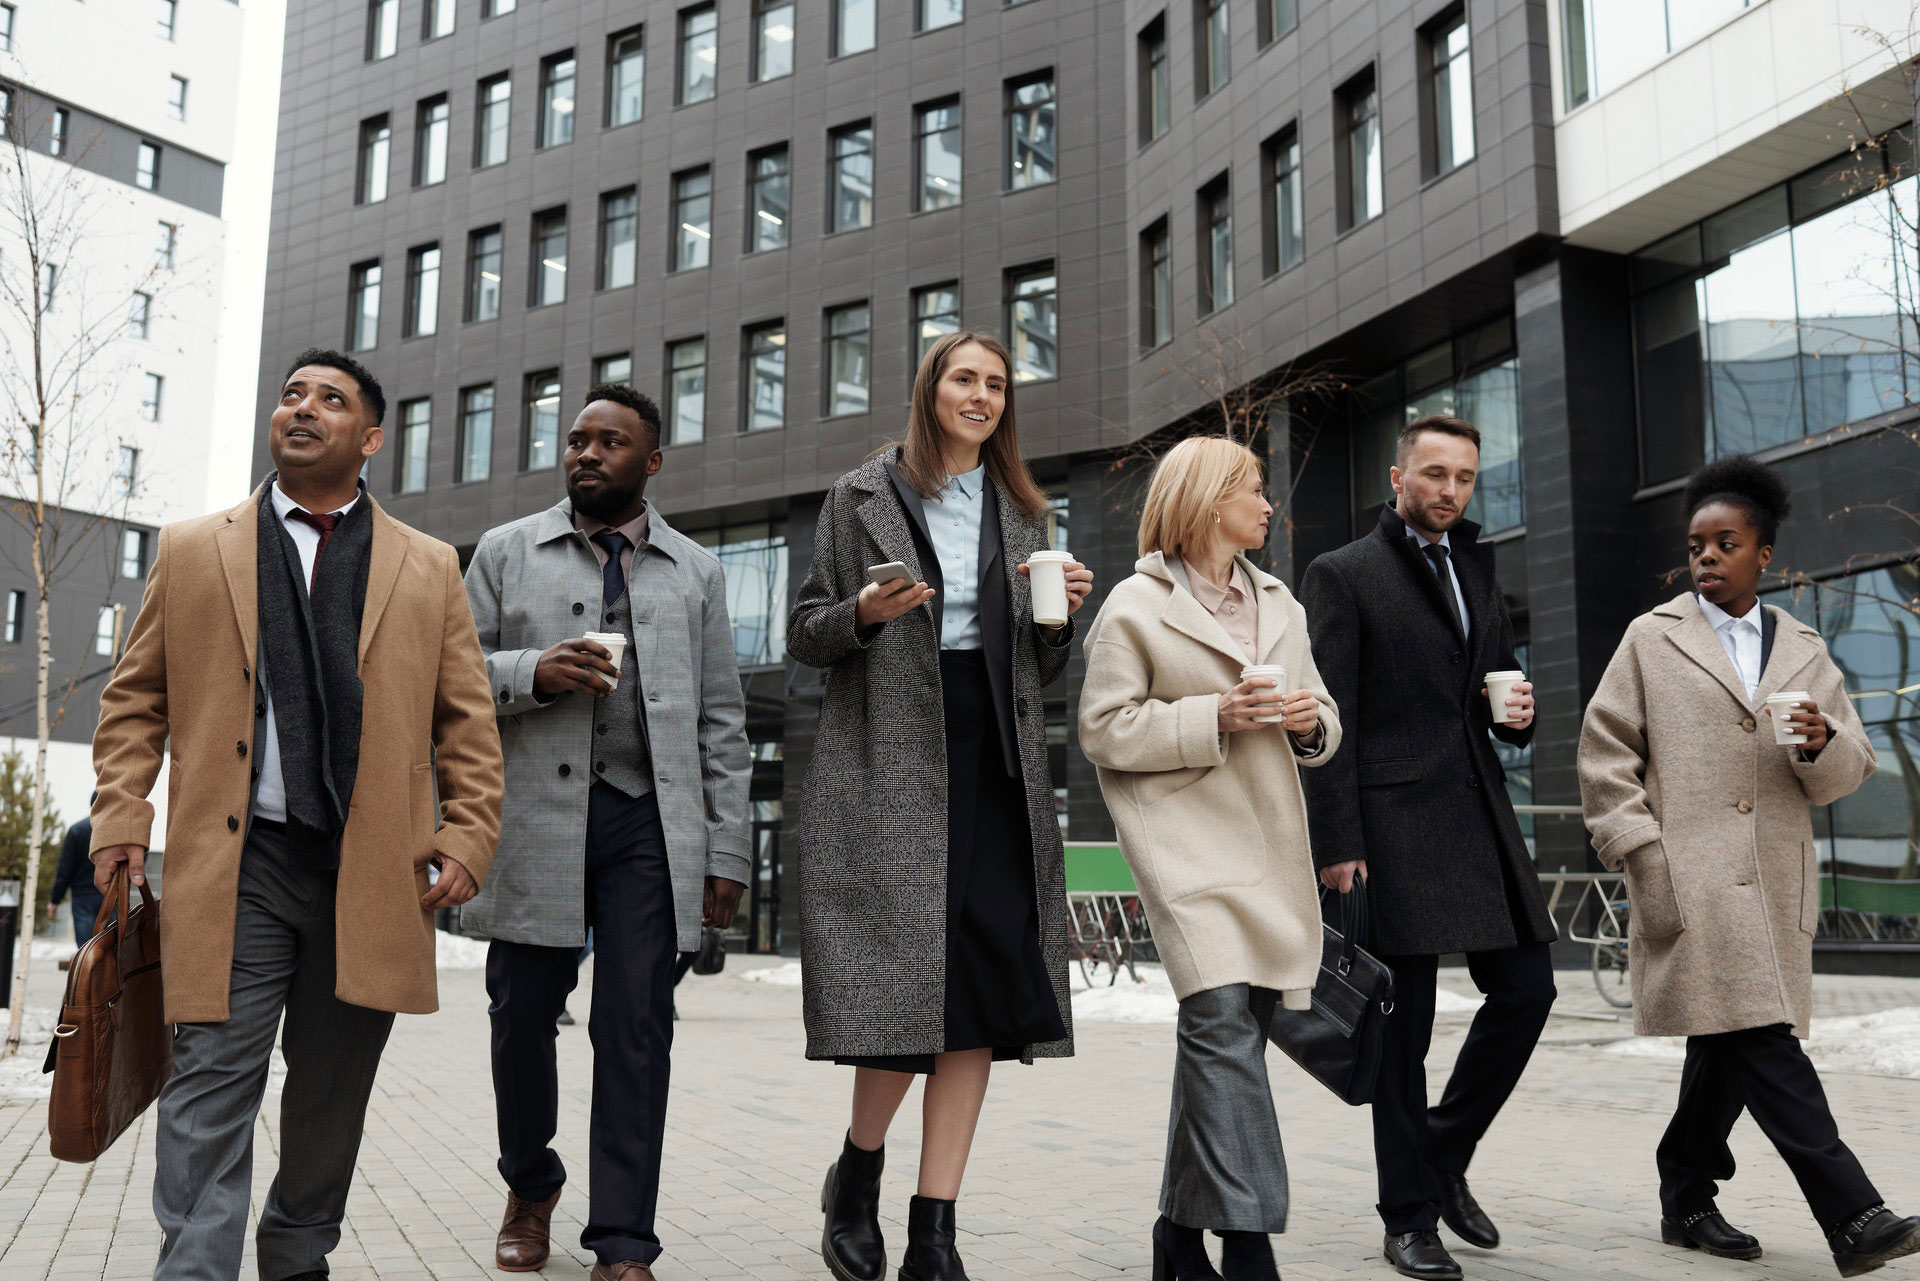 Group of six people working in a city. Five of the people are holding coffees. Everyone is wearing a coat and walking in the same direction. They're looking in different directions.